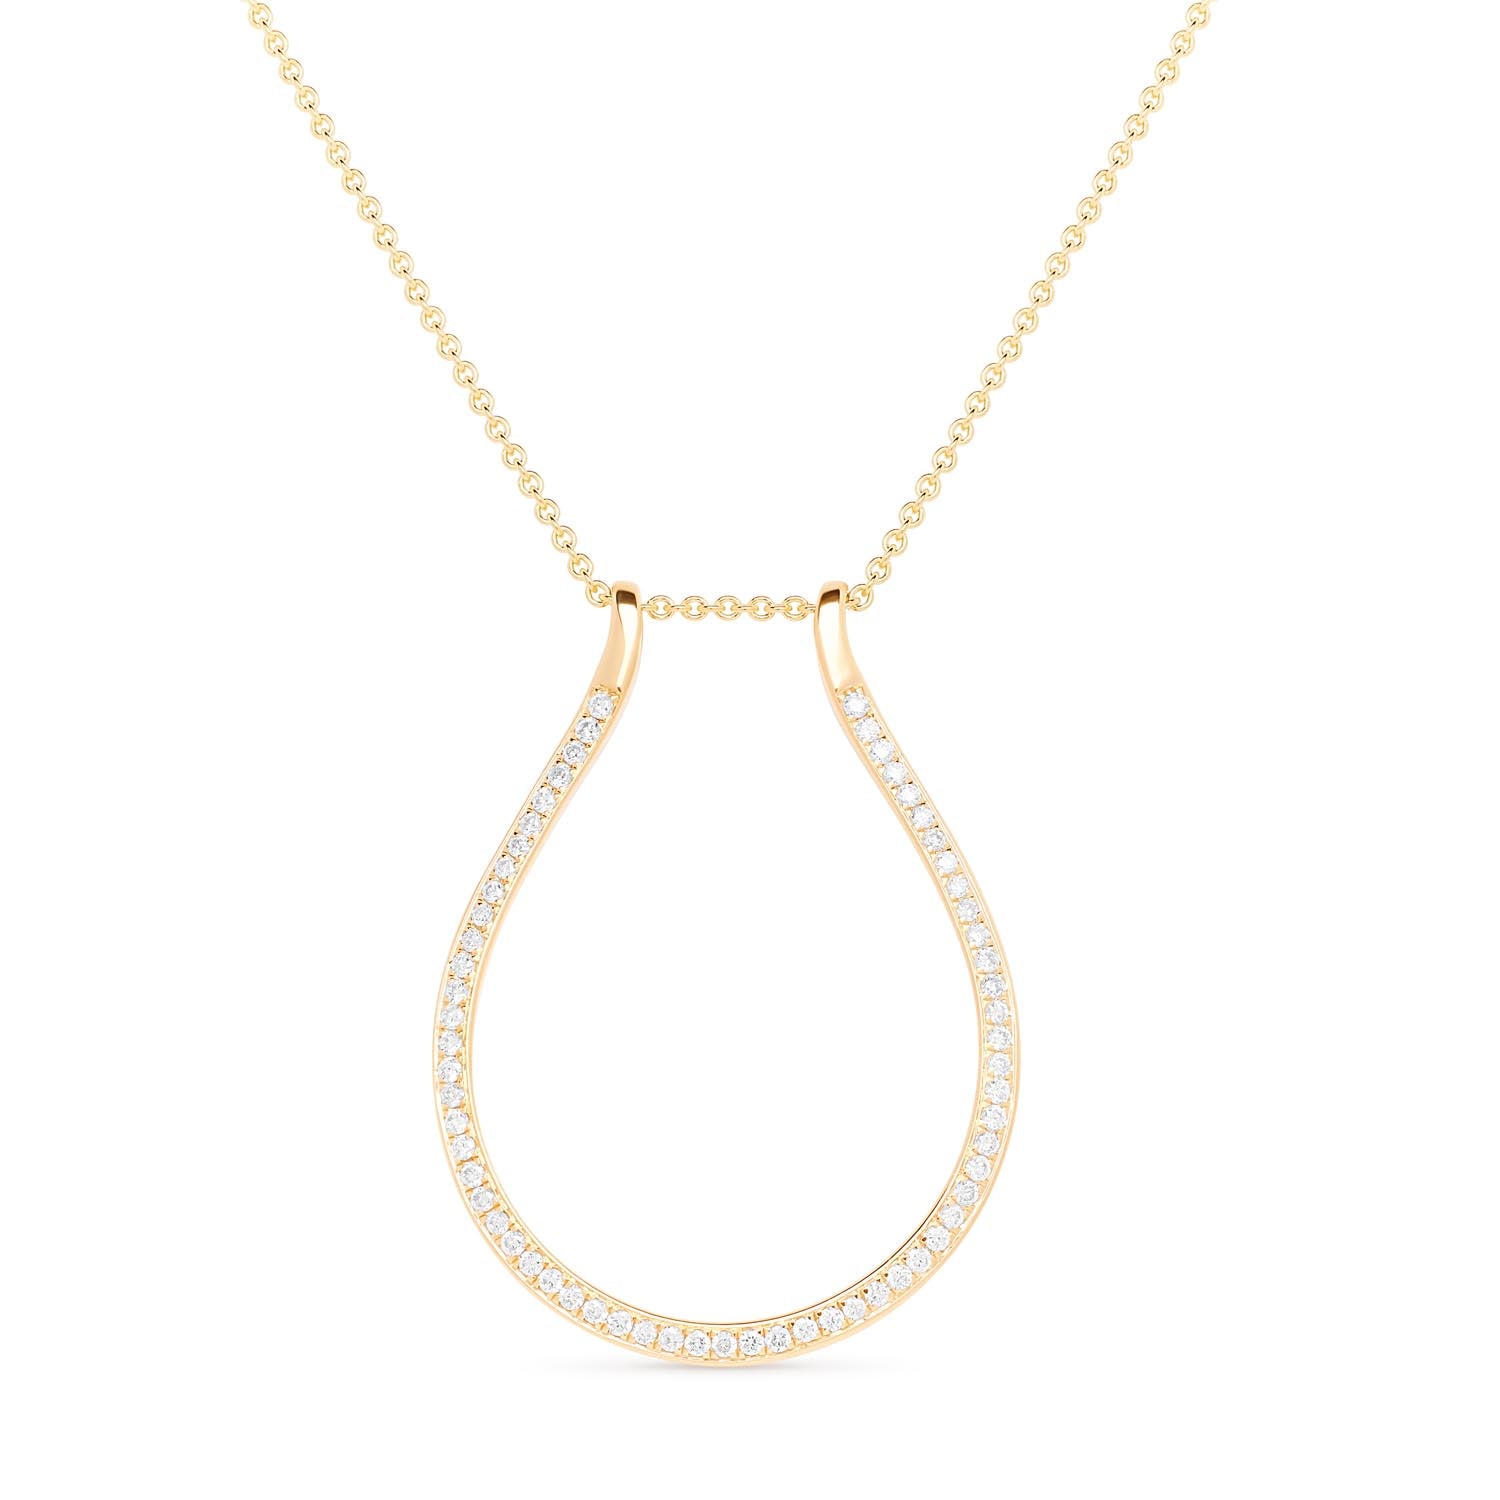 Ring Holder Diamond Necklace - Yellow Gold